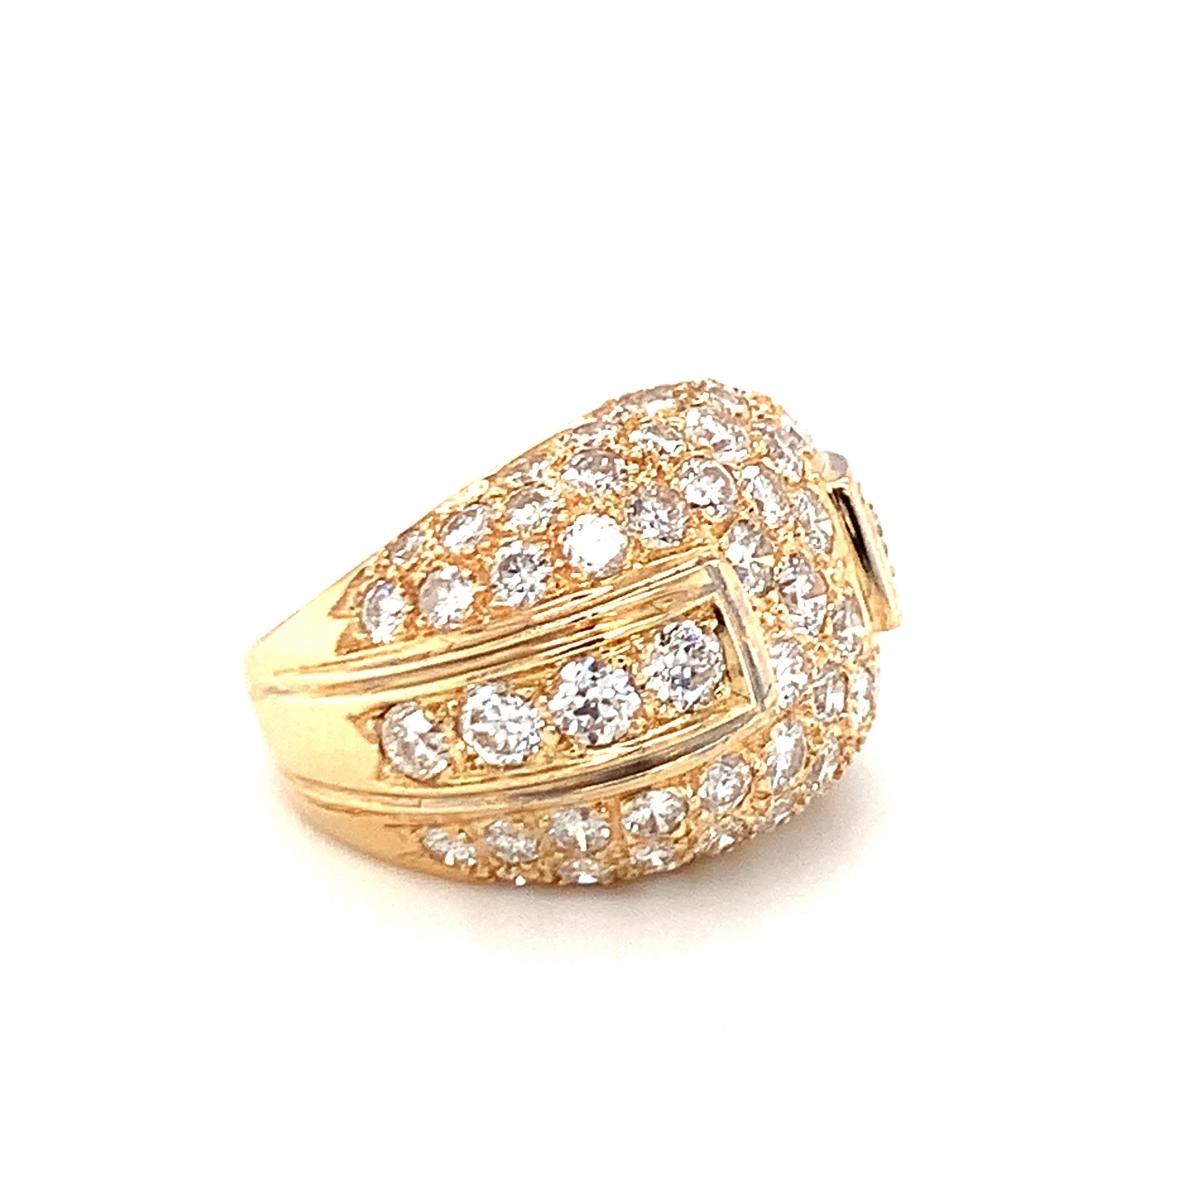 Pave Diamond Bombe 14K Yellow Gold Ring, circa 1970s In Excellent Condition For Sale In Beverly Hills, CA